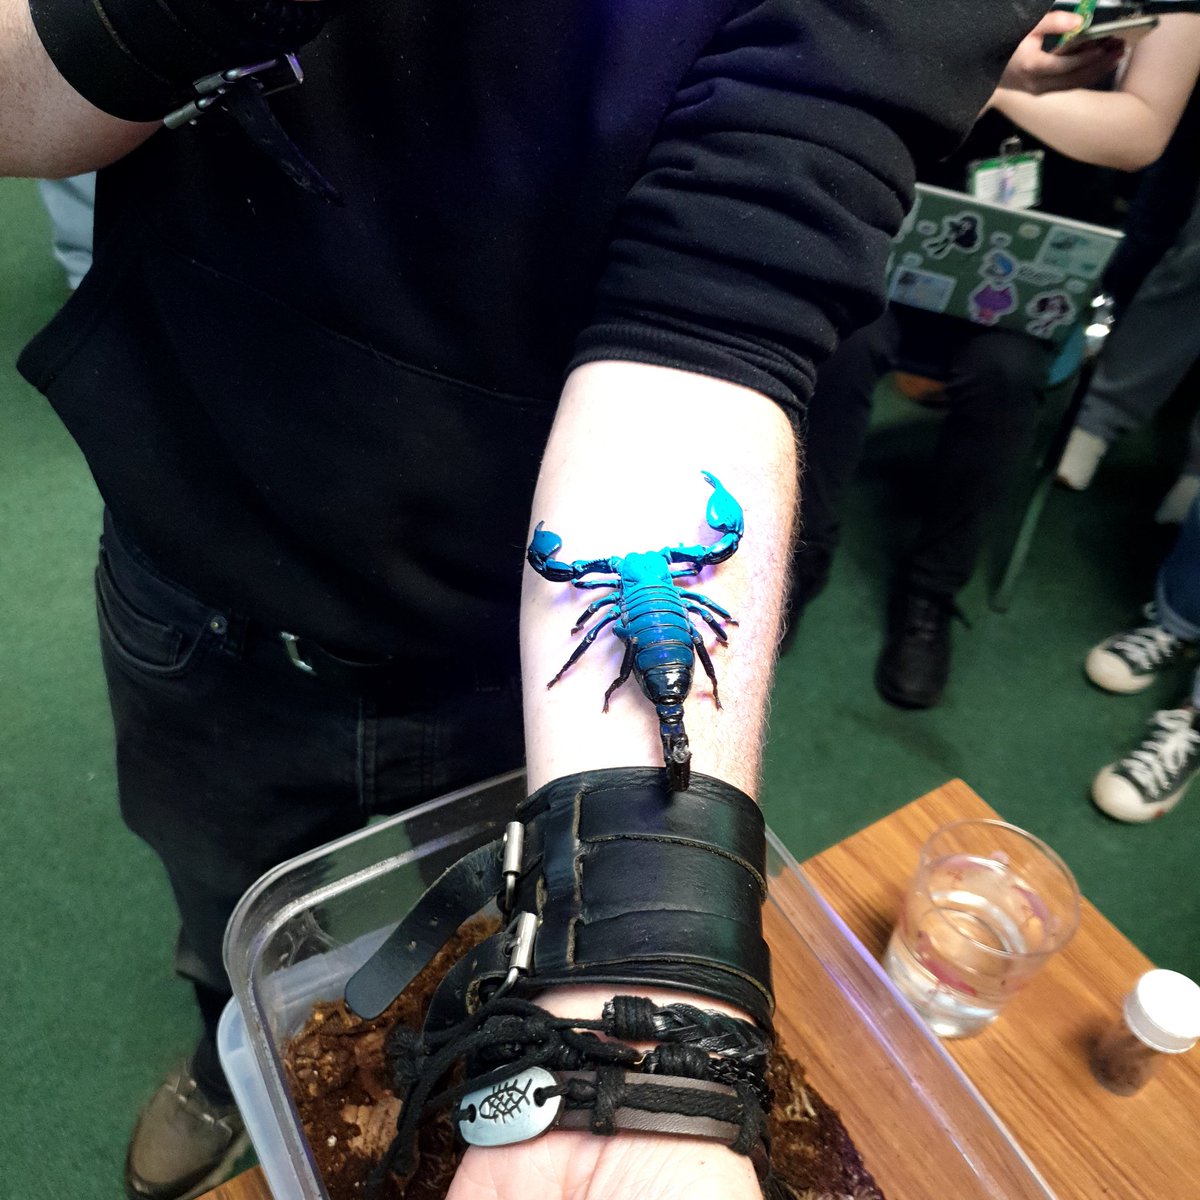 Always a pleasure to have a visit from @collieennis and his beautiful arthropods. This one even managed to sneak its way into my Entomology course, and happily, because look how cool it is! 🤩